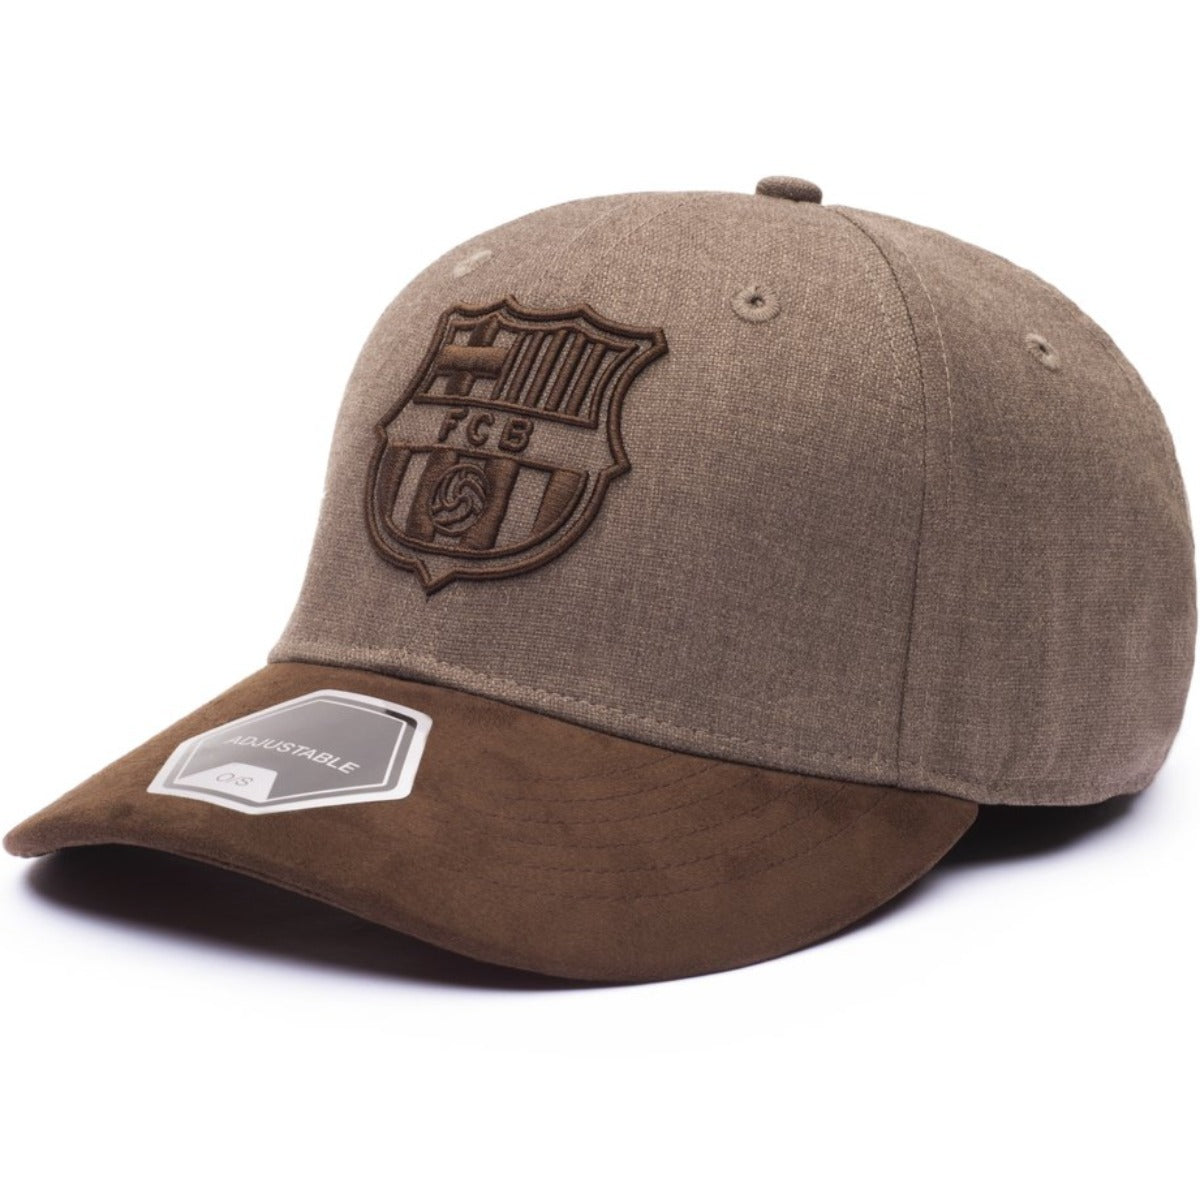 FI COLLECTIONS FC BARCELONA CAPITANO ADJUSTABLE HAT